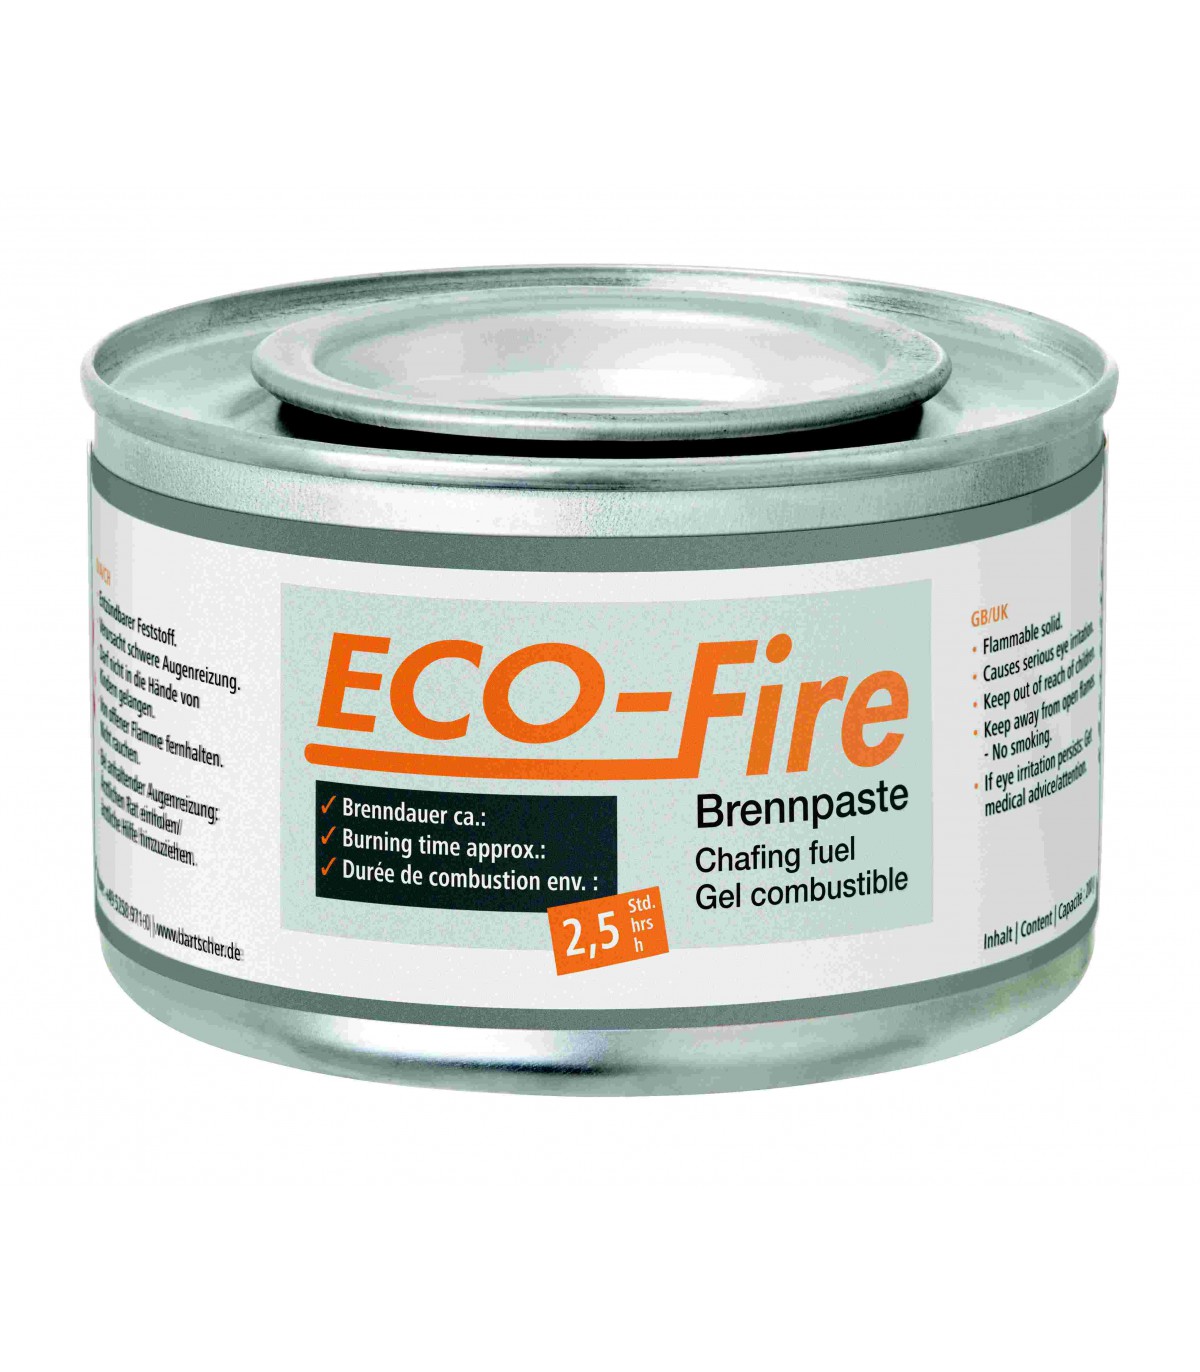 Gel Combustible Eco-Fire 200g pour chafing dish